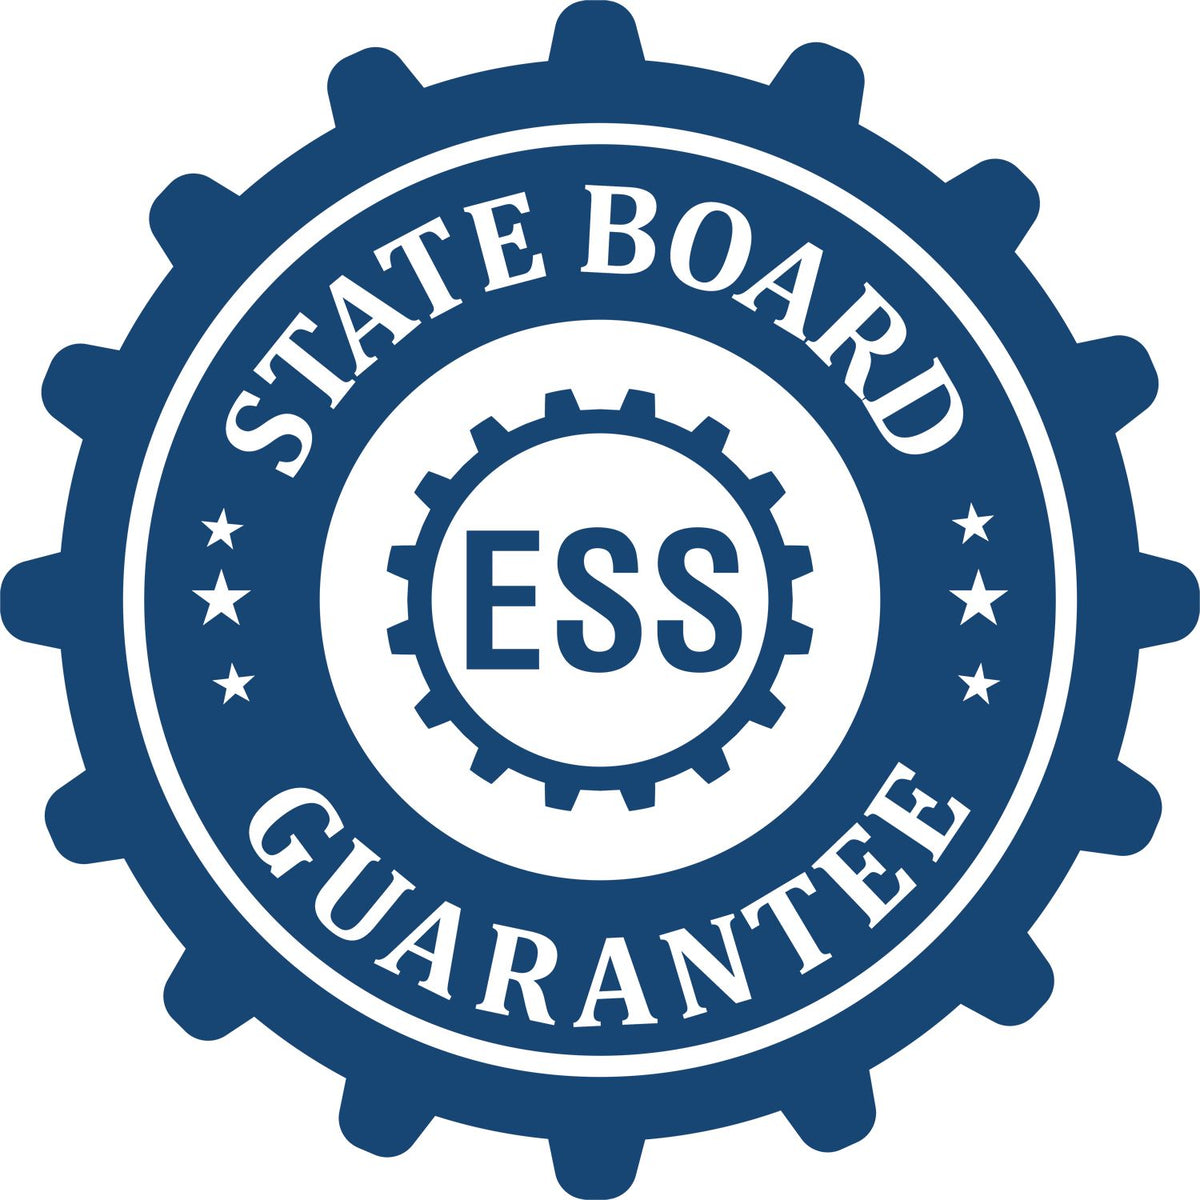 An emblem in a gear shape illustrating a state board guarantee for the New Jersey Professional Engineer Seal Stamp product.